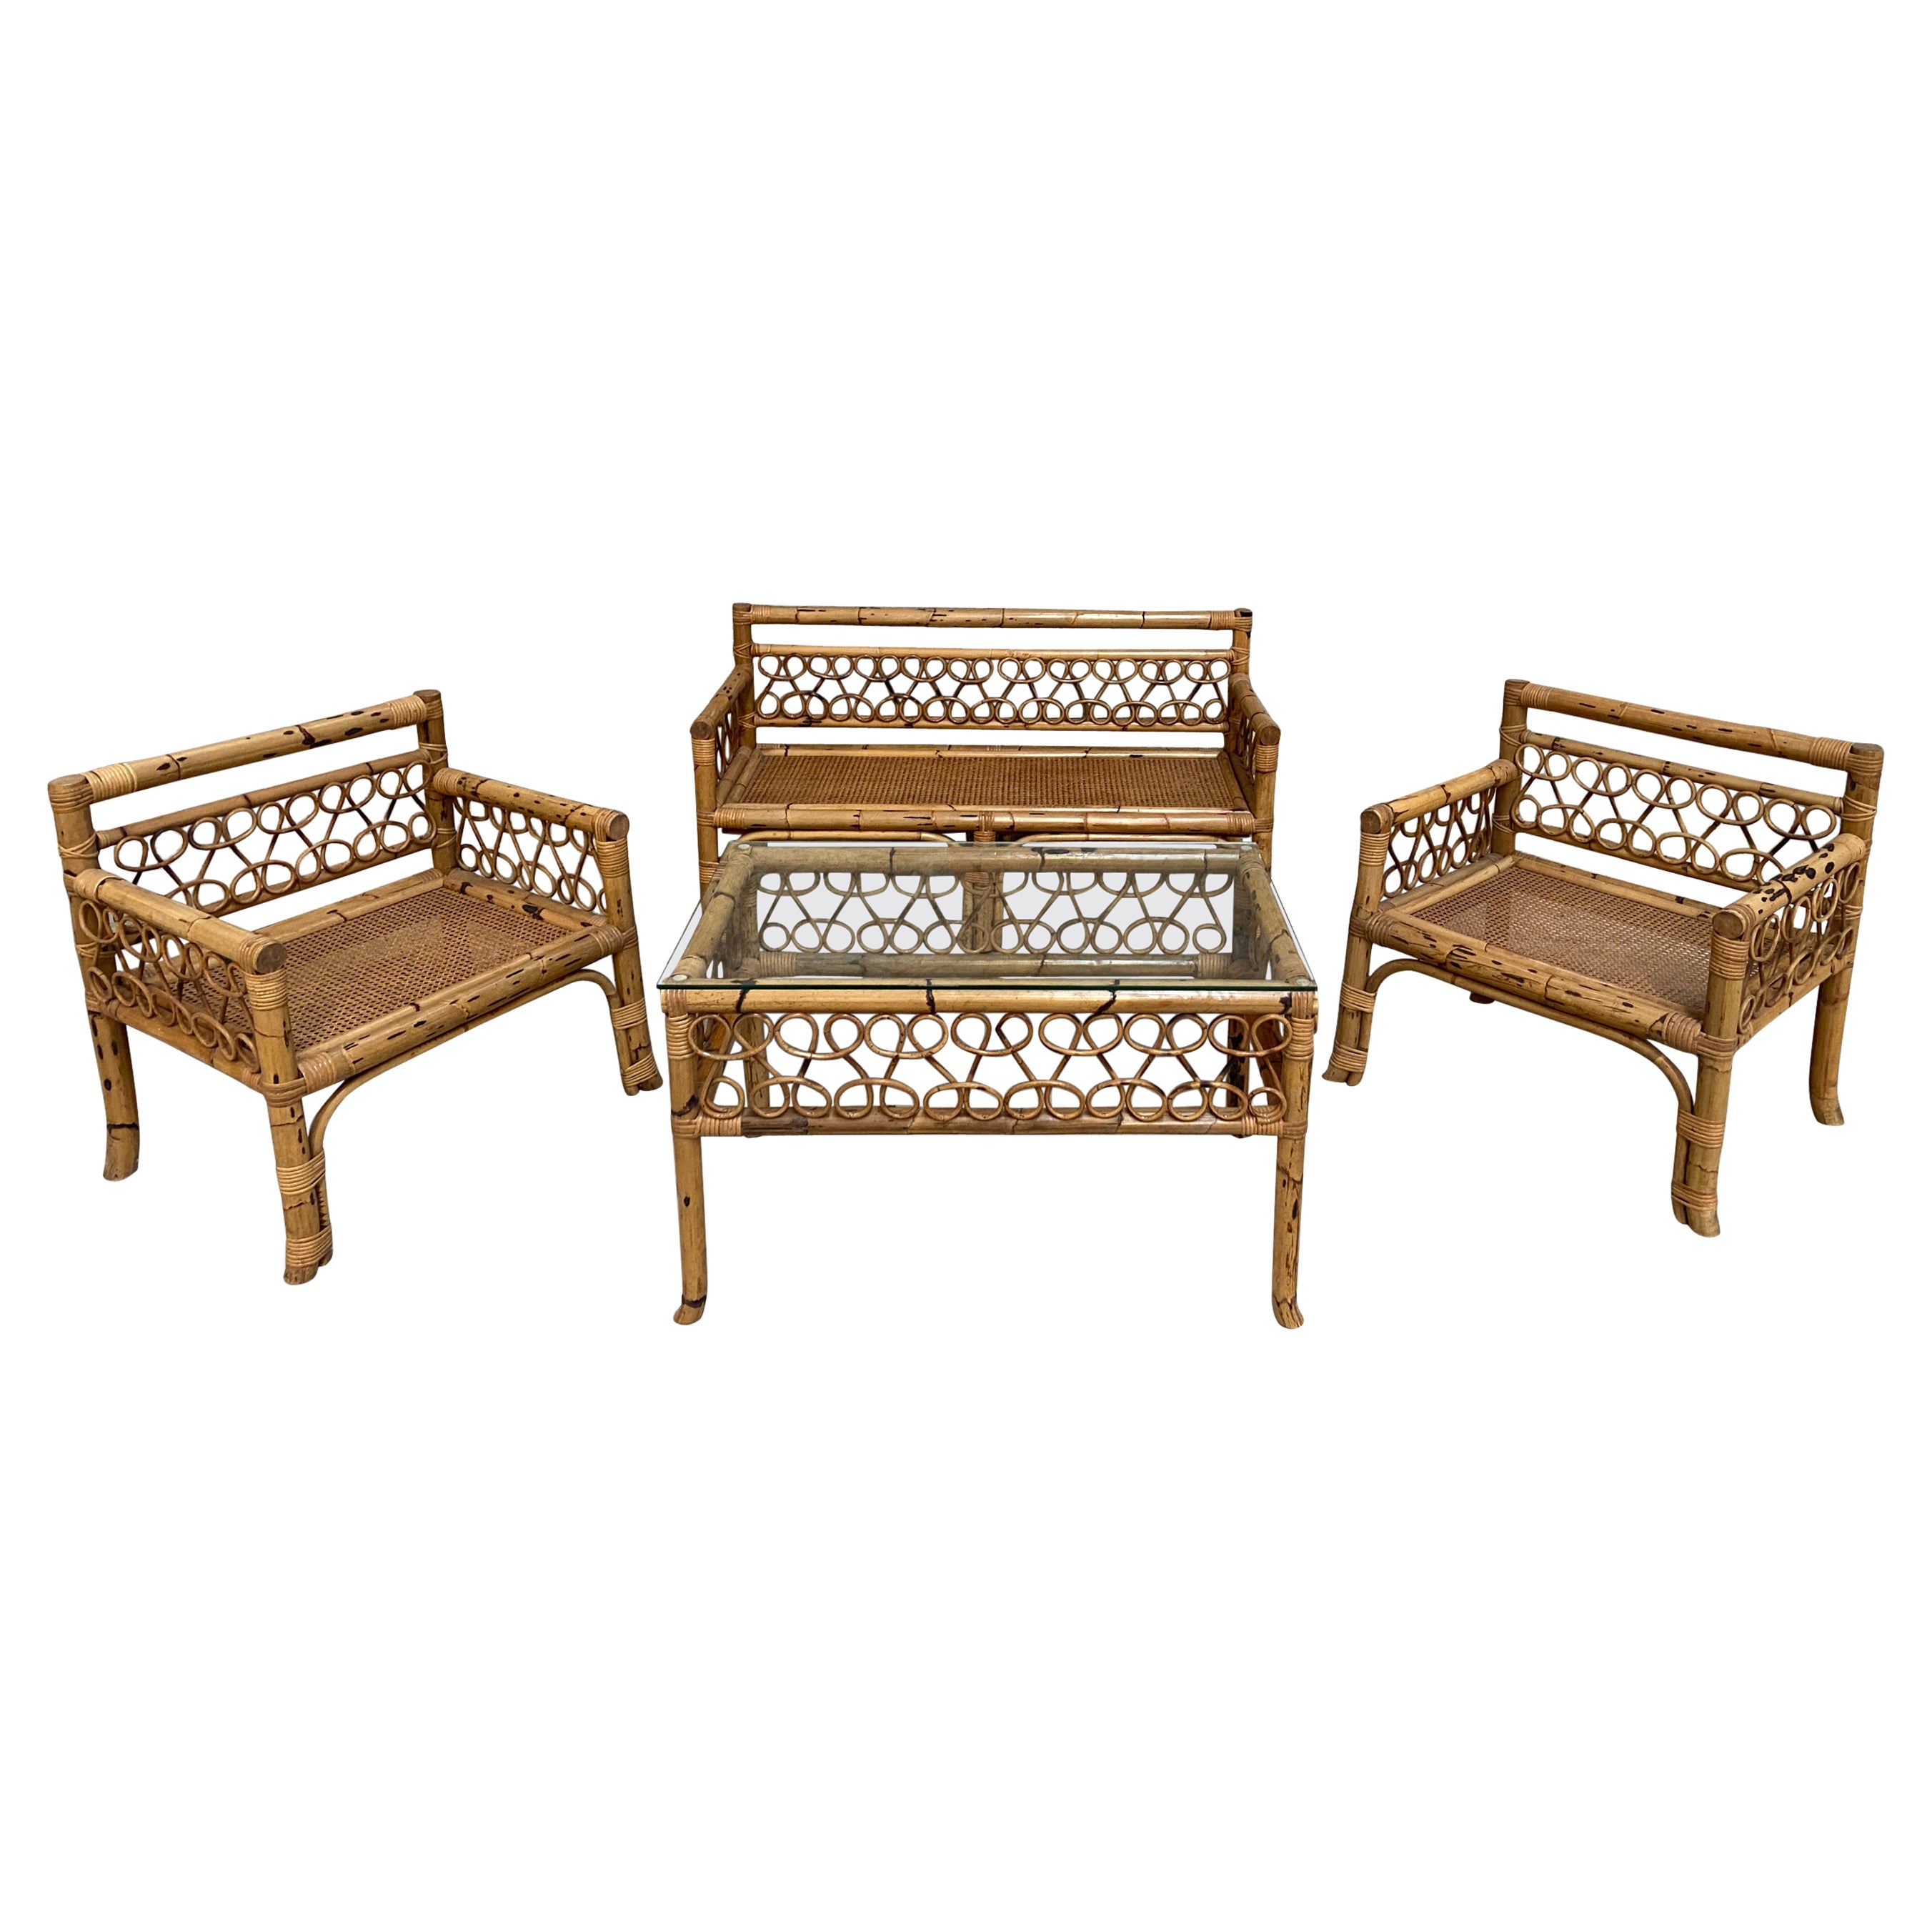 Mid-Century Modern Italian Bamboo Living Room Set with "Vienna" Straw Seat 1970s For Sale